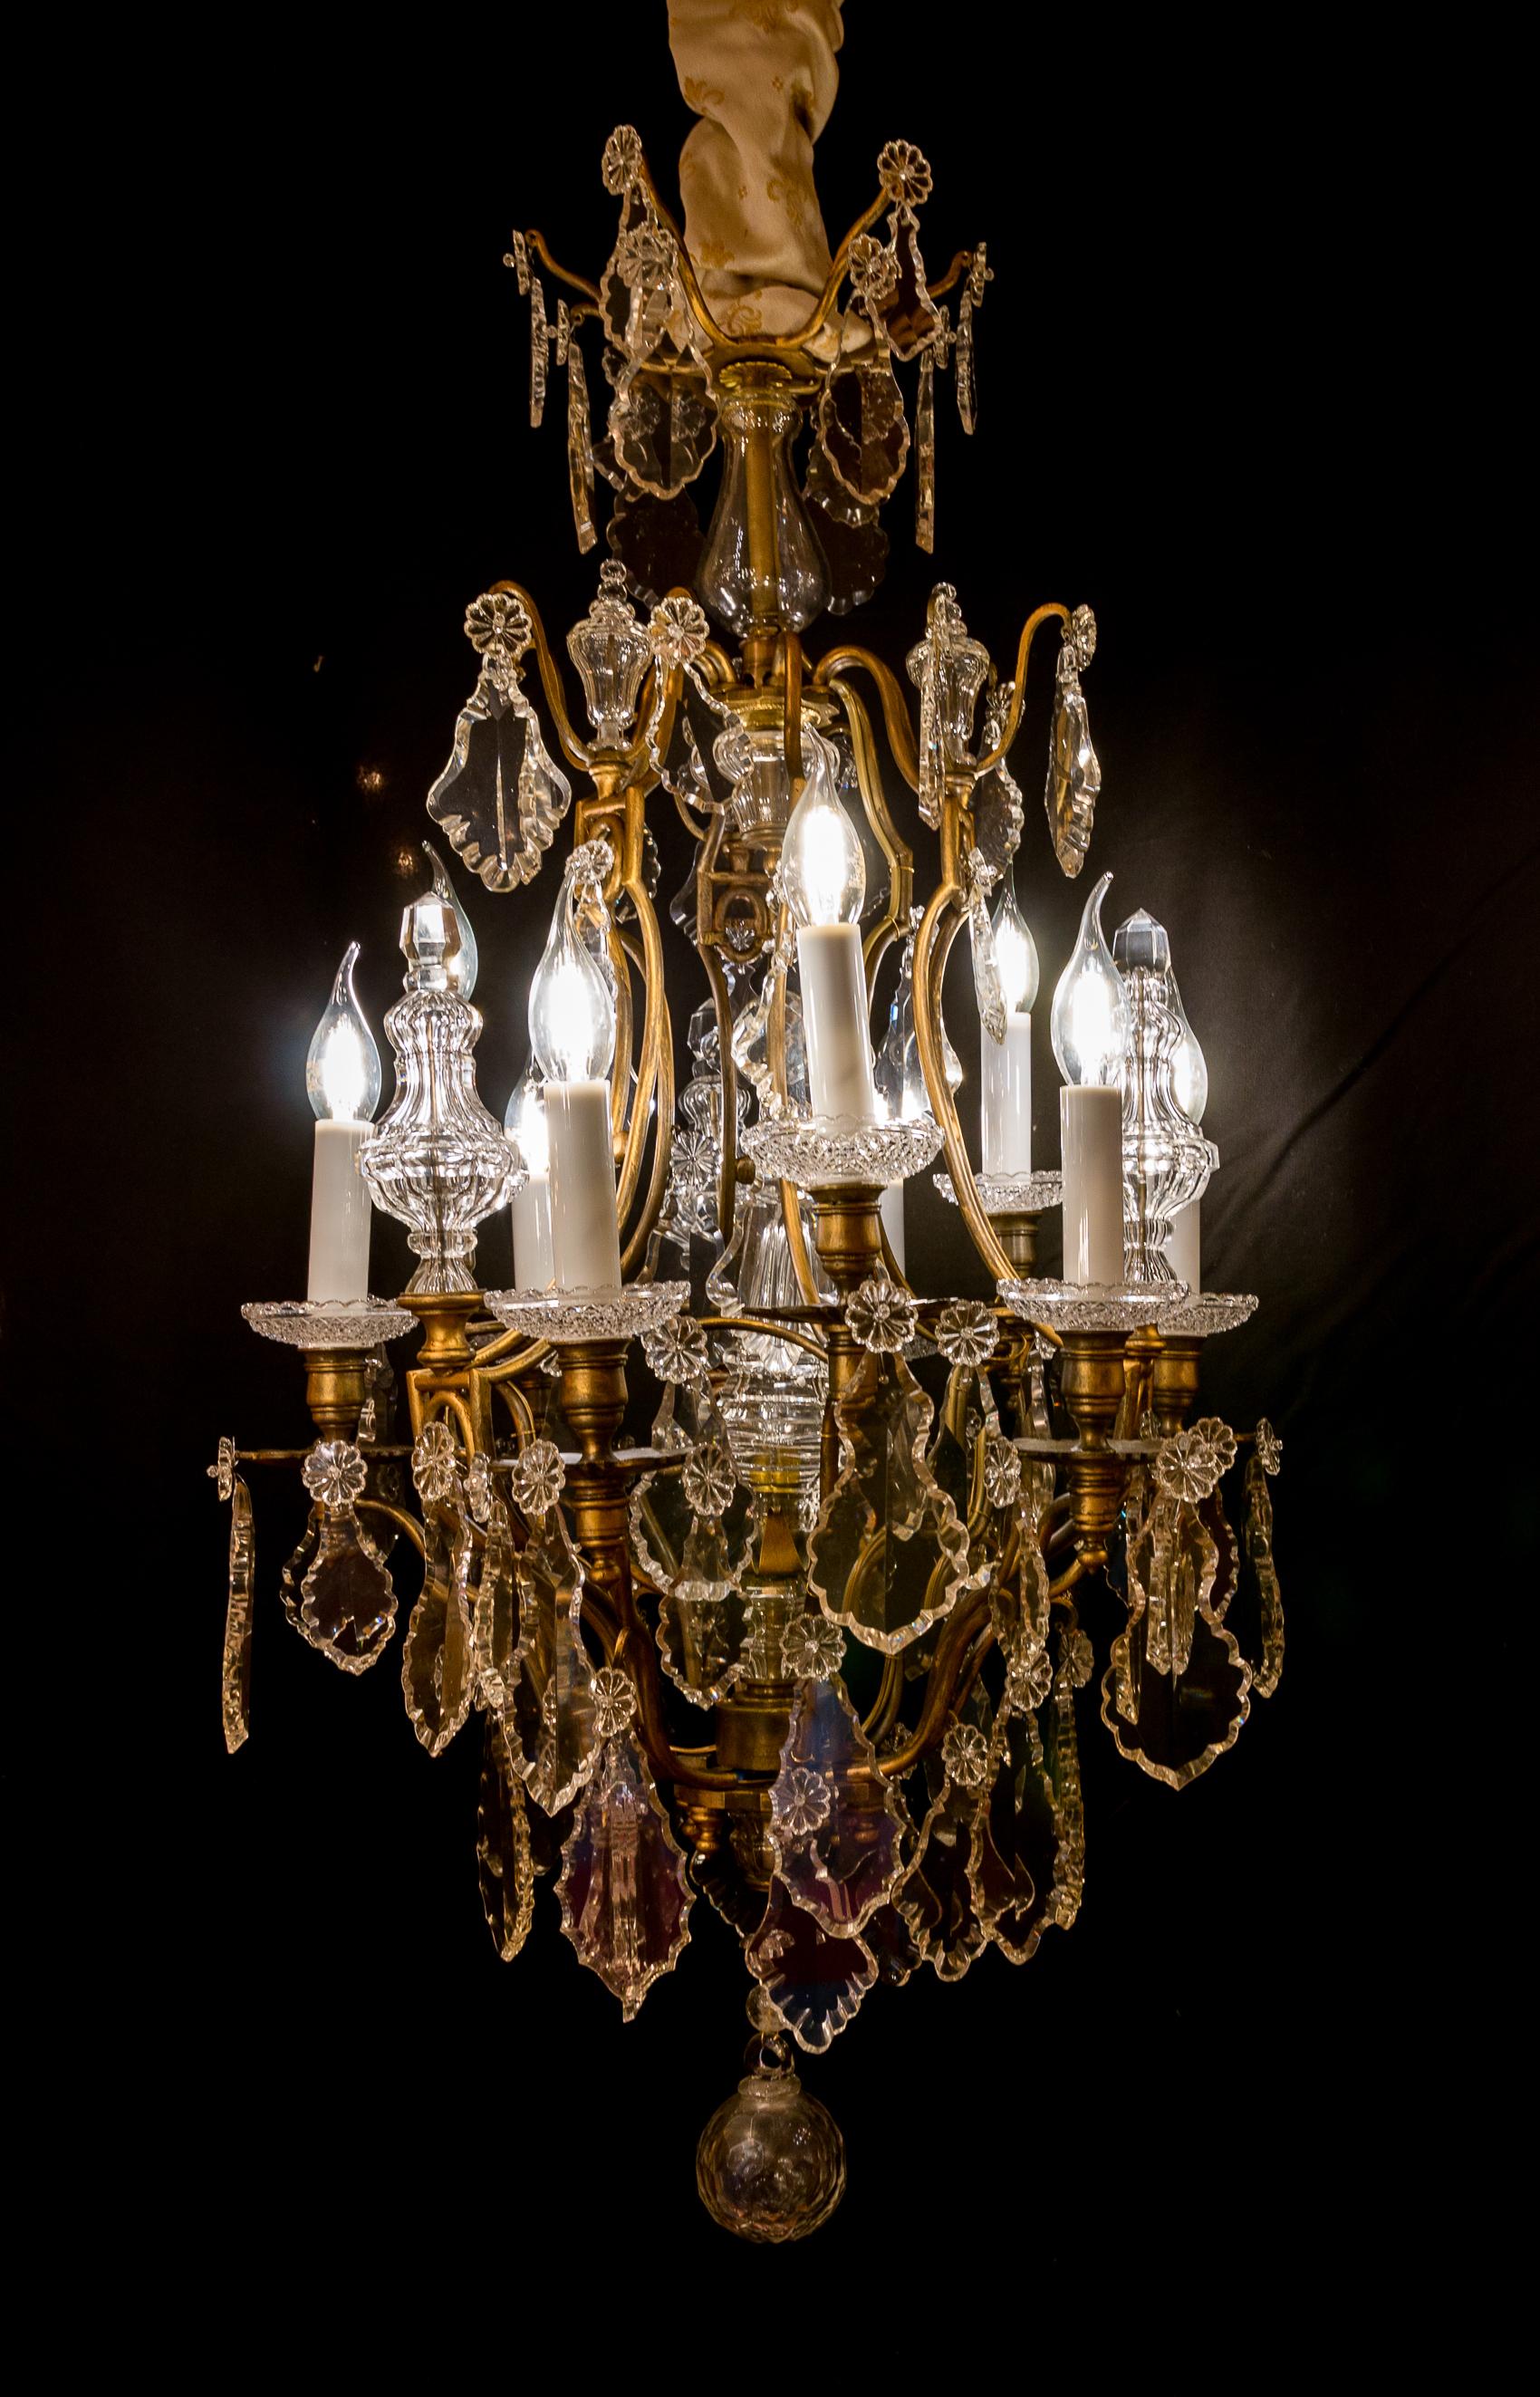 By The Cristalleries de Baccarat, French Louis XV style, gilt-bronze and cut-crystal chandelier, circa 1910-1920.

A beautiful gilt-bronze and hand cut-crystal, chandelier in the classic Louis XV style.
Our chandelier is composed of nine